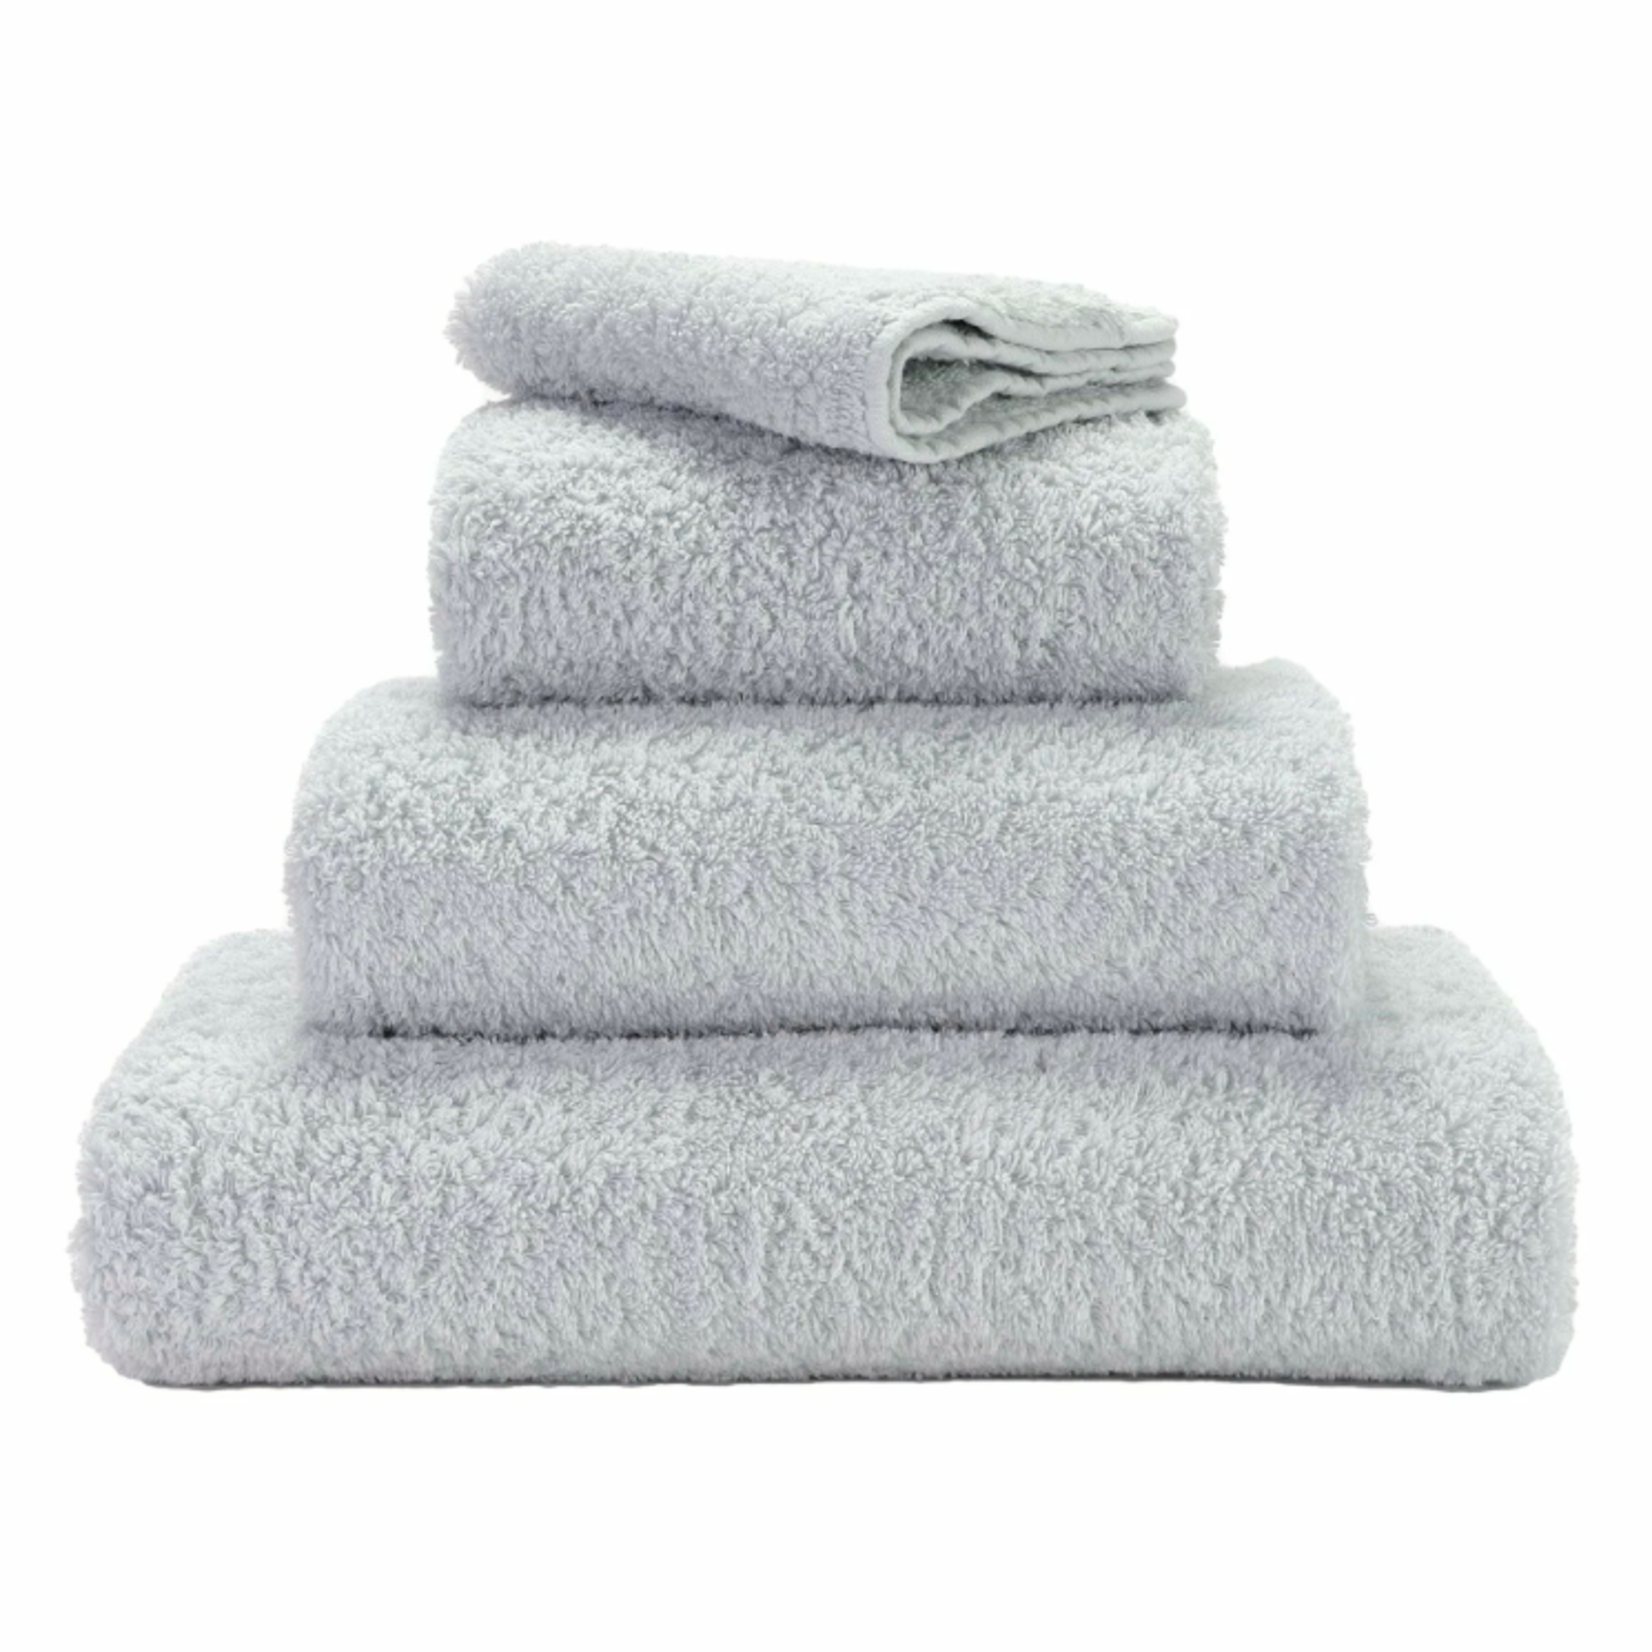 Abyss Abyss Super Pile Towels 930 Perle